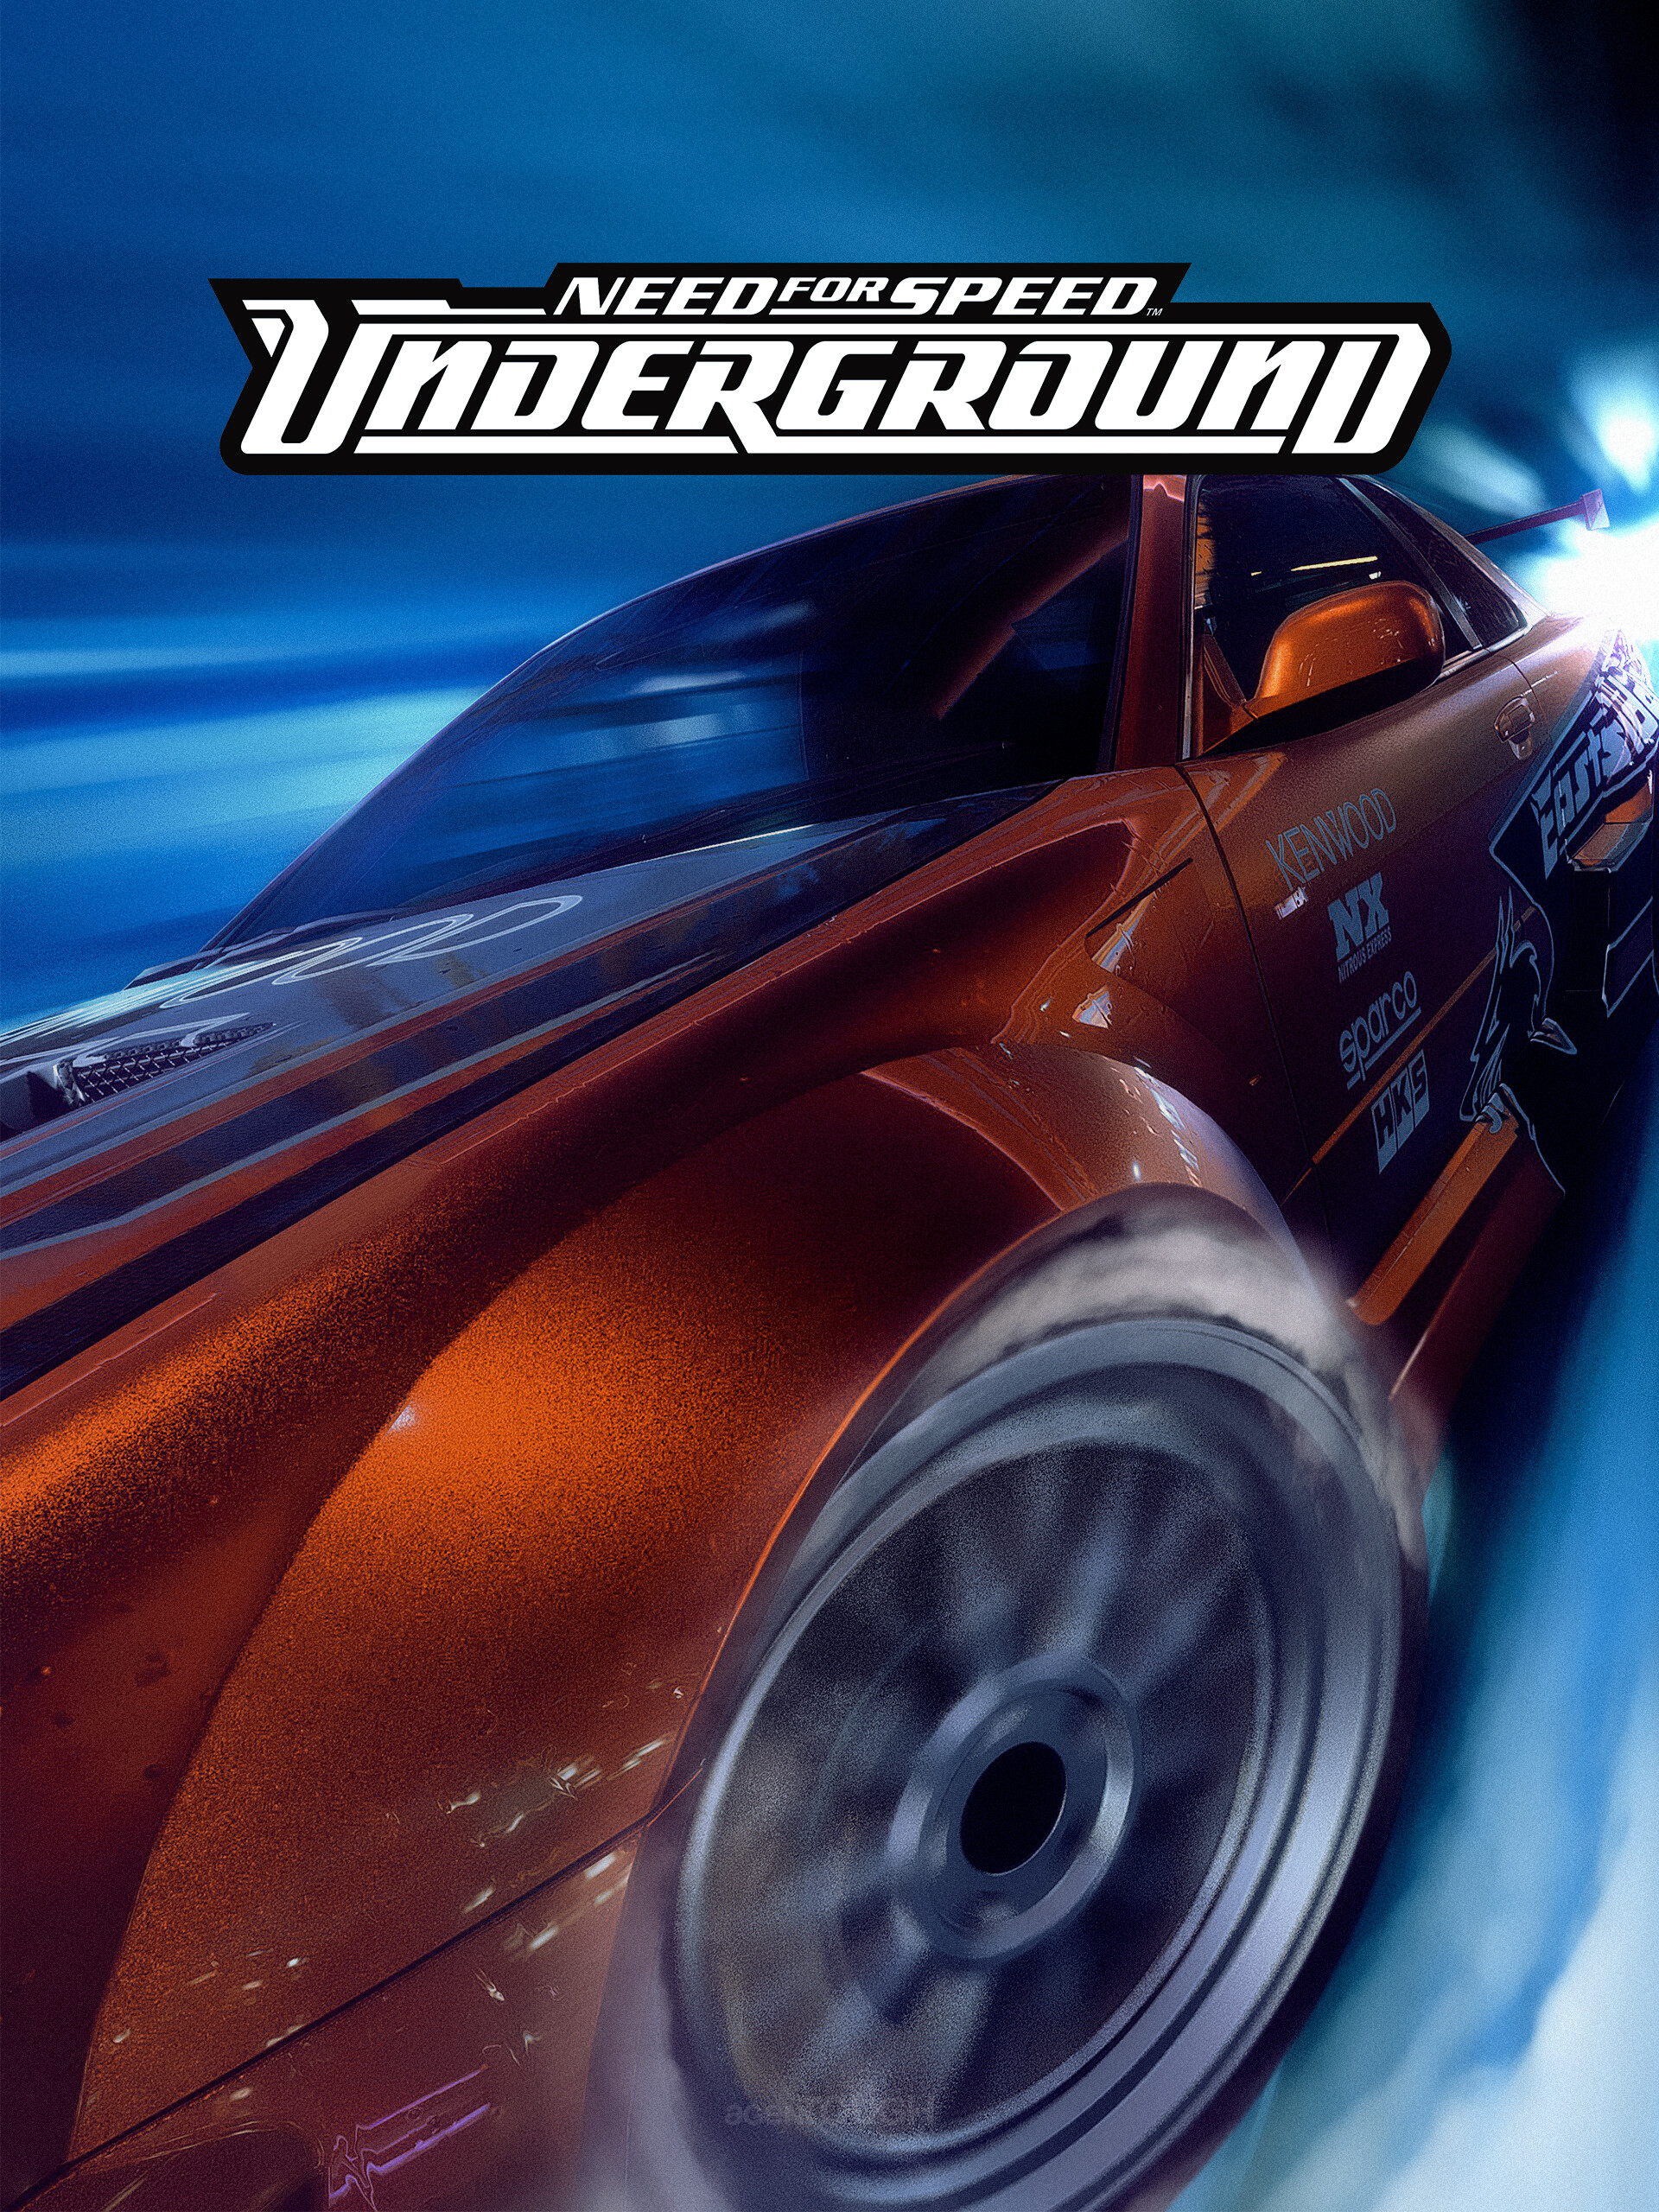 Need For Speed Need For Speed Underground Car Cover Art Video Games Nissan Nissan Skyline Nissan Sky 1920x2560